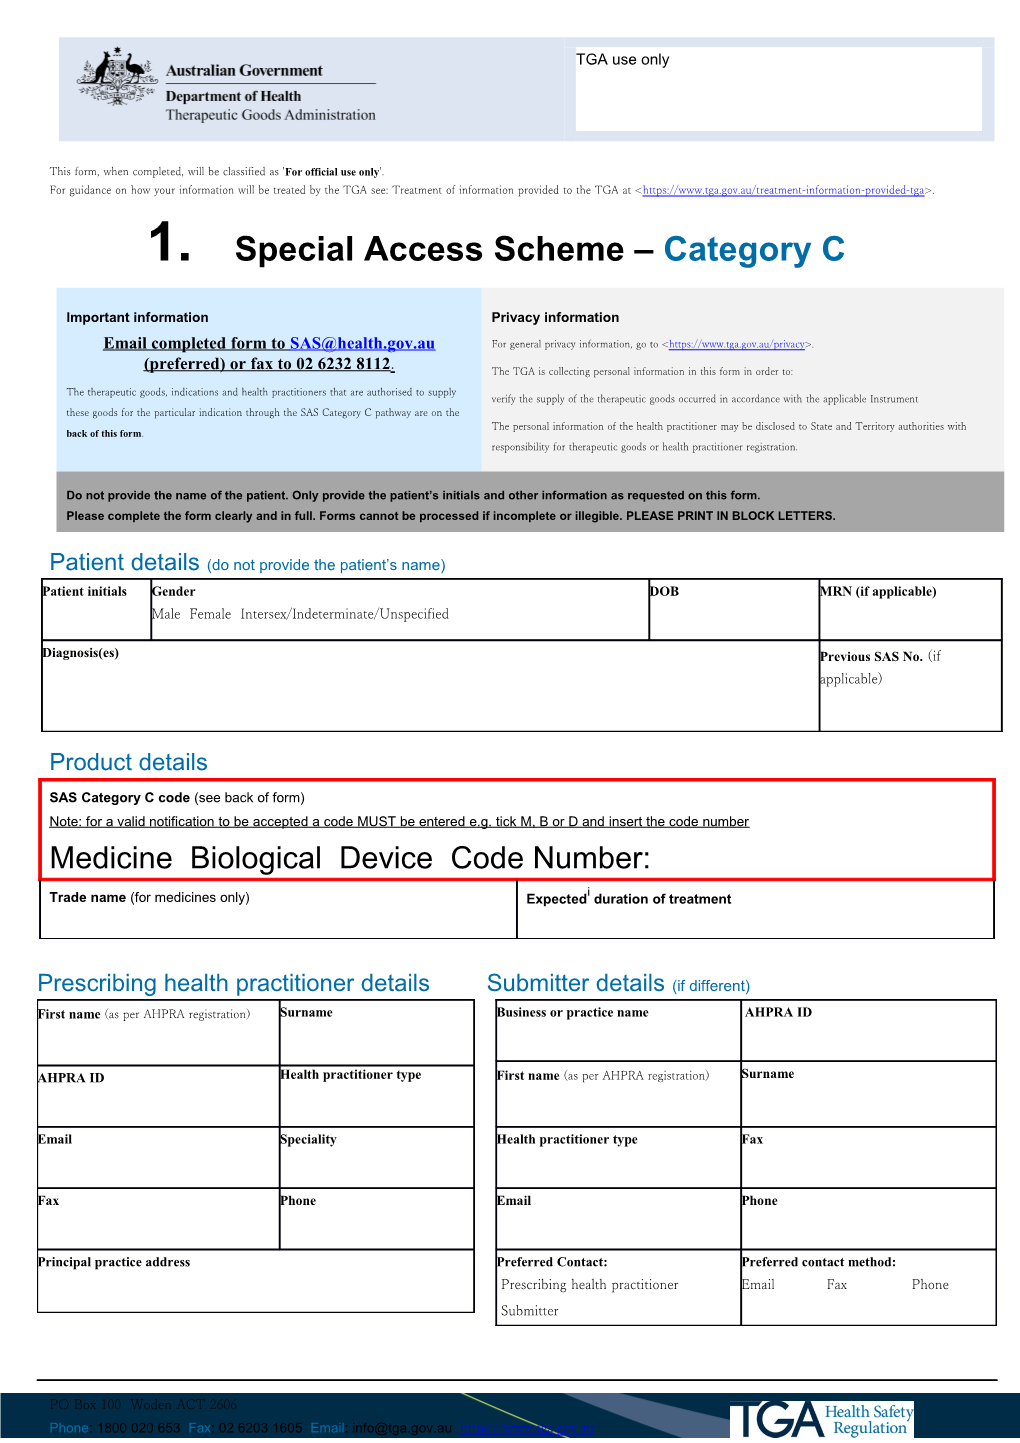 Special Access Scheme - Category C